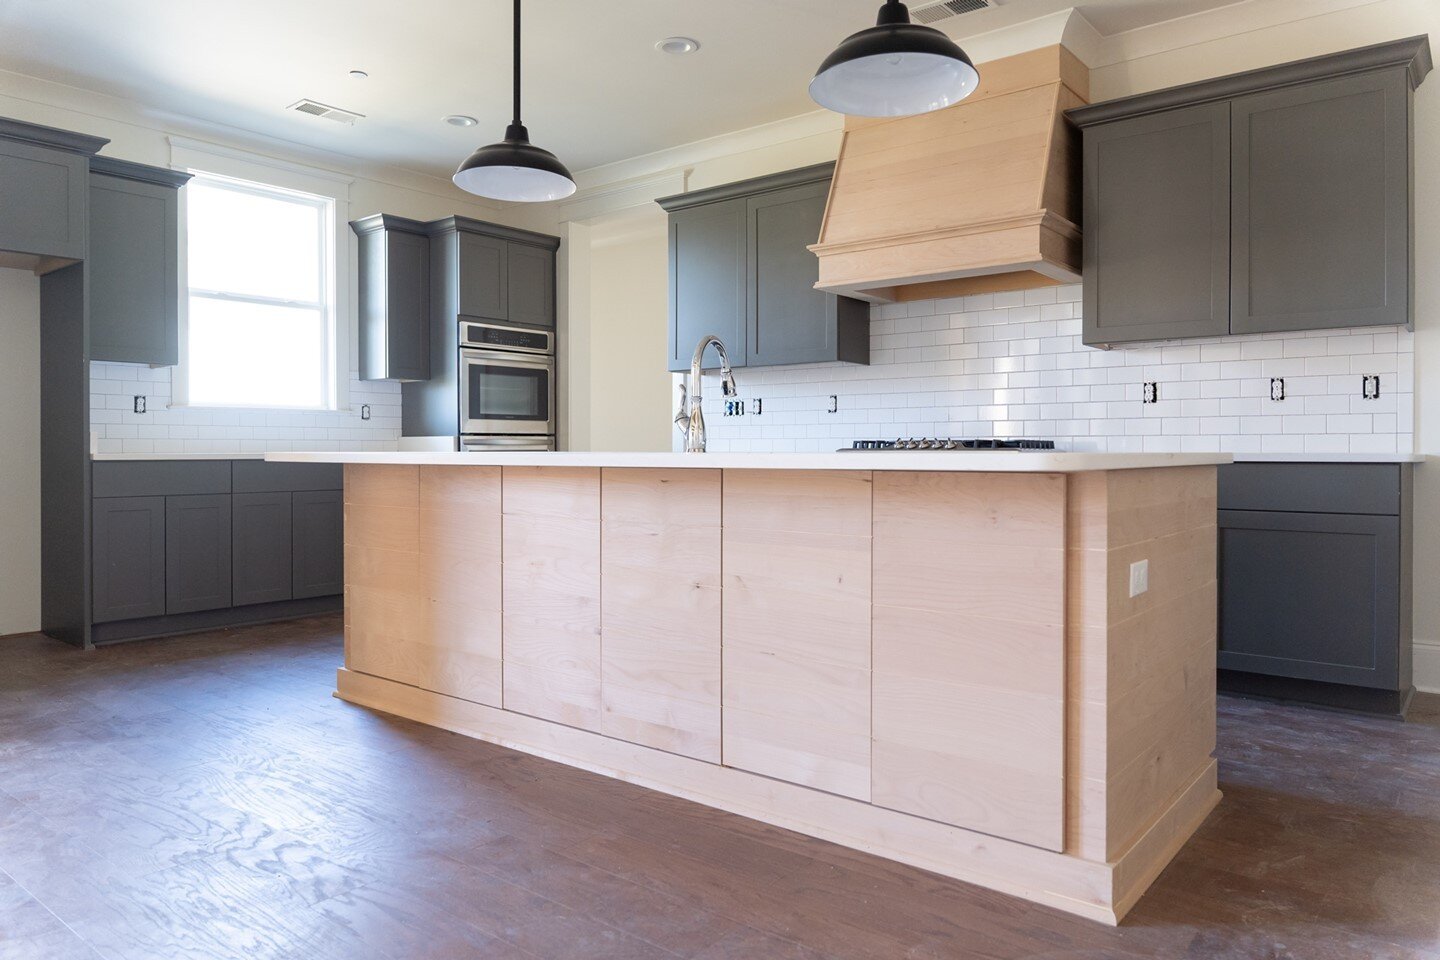 This kitchen has plenty of natural light and prep space.⁠
⁠
⁠
#EllerConstruction #homebuilder #pipertonhomebuilder #piperton #dreamhomebuilder #customhomebuilder #custombuilt #dreamhome  #customhomespiperton #customhomebuilding #newconstruction #cust